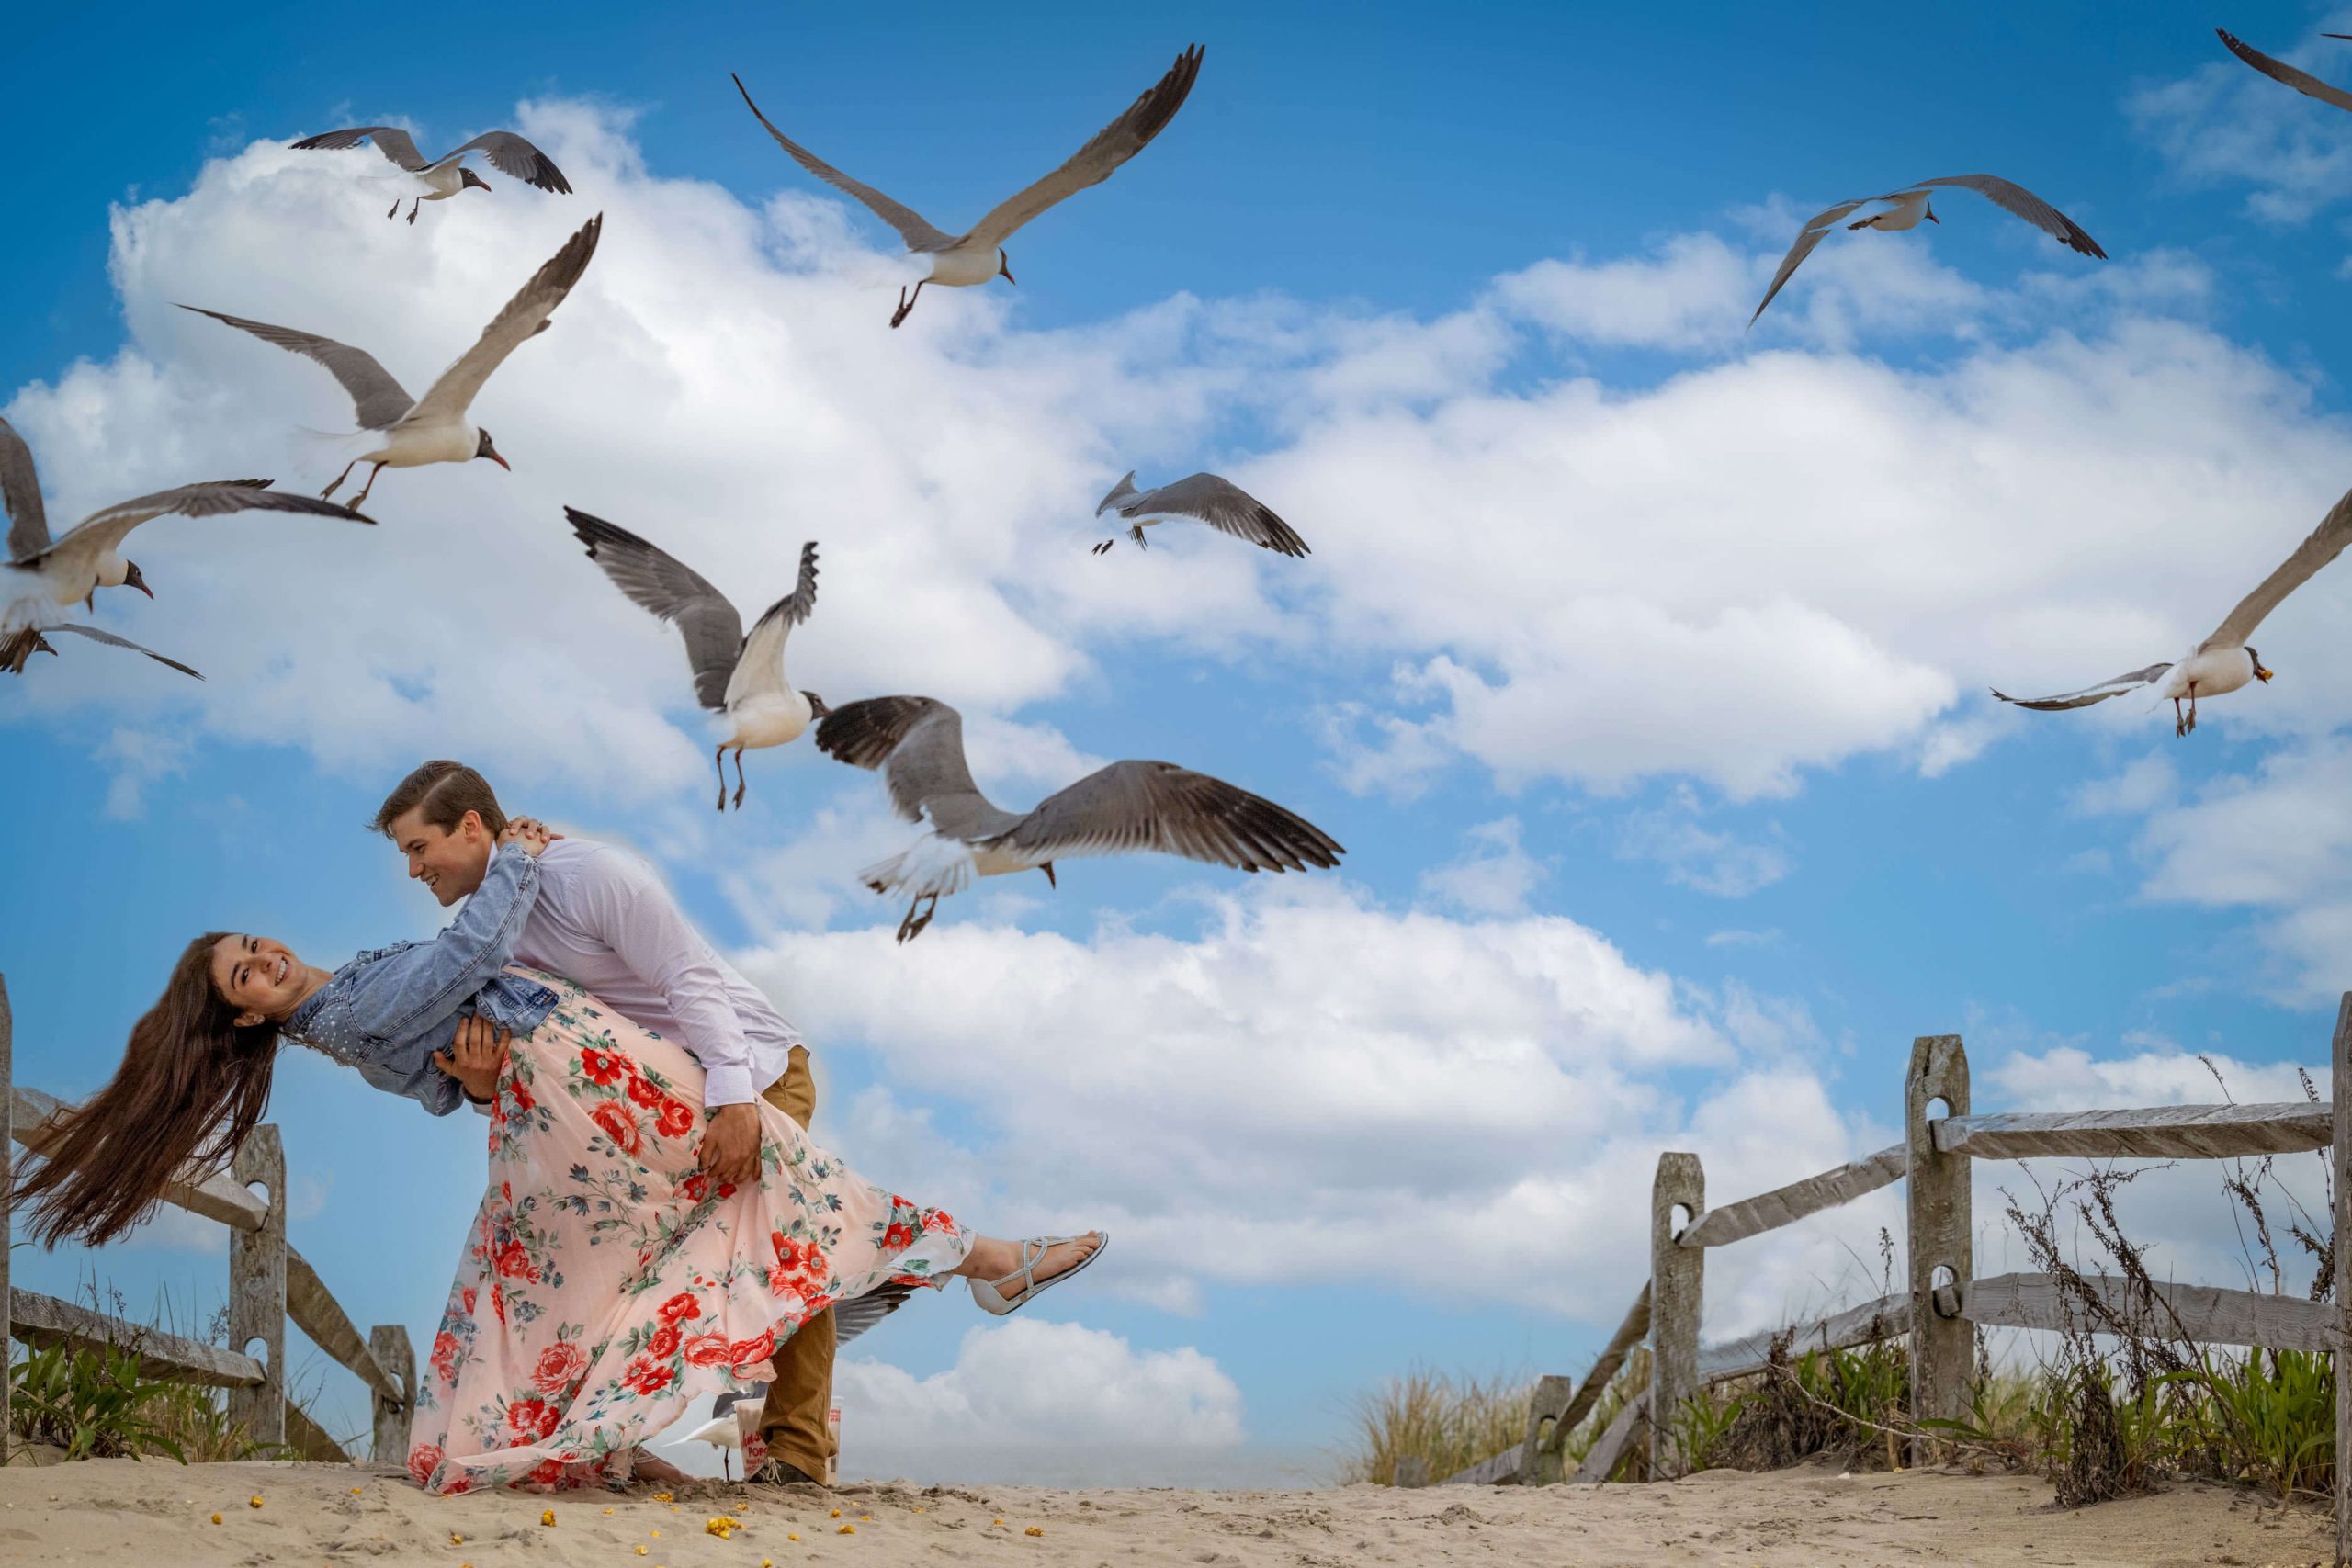 man dipping woman on beach as seagulls fly